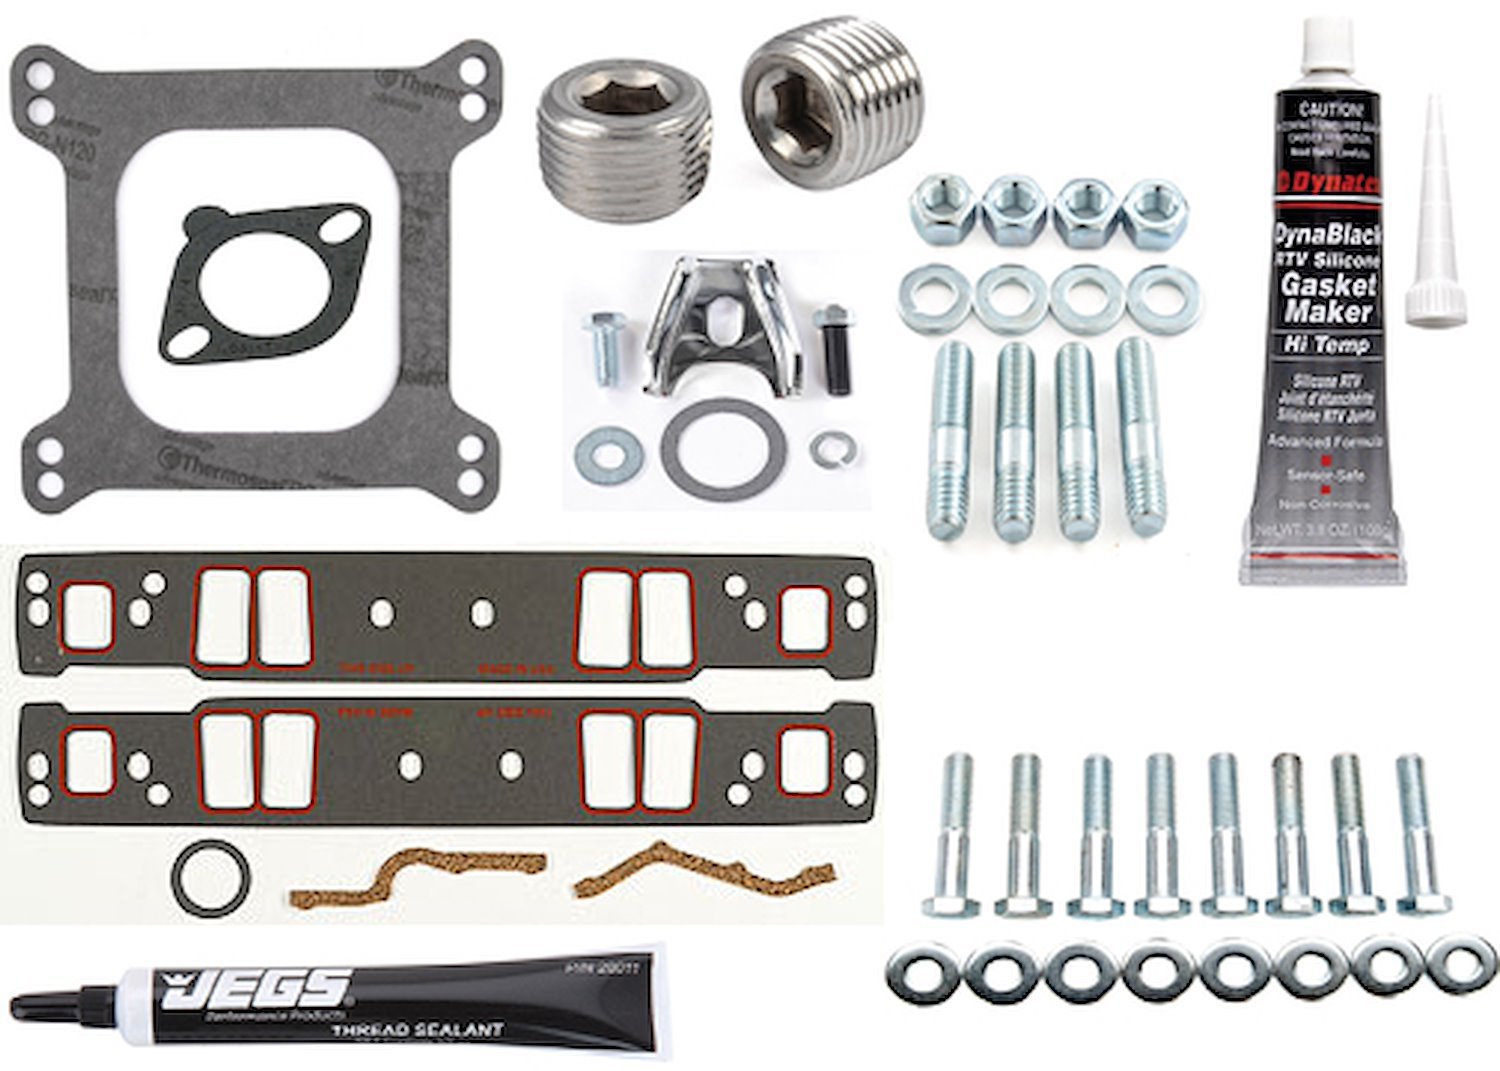 Intake Manifold Installation Kit for Small Block Chevy Vortec